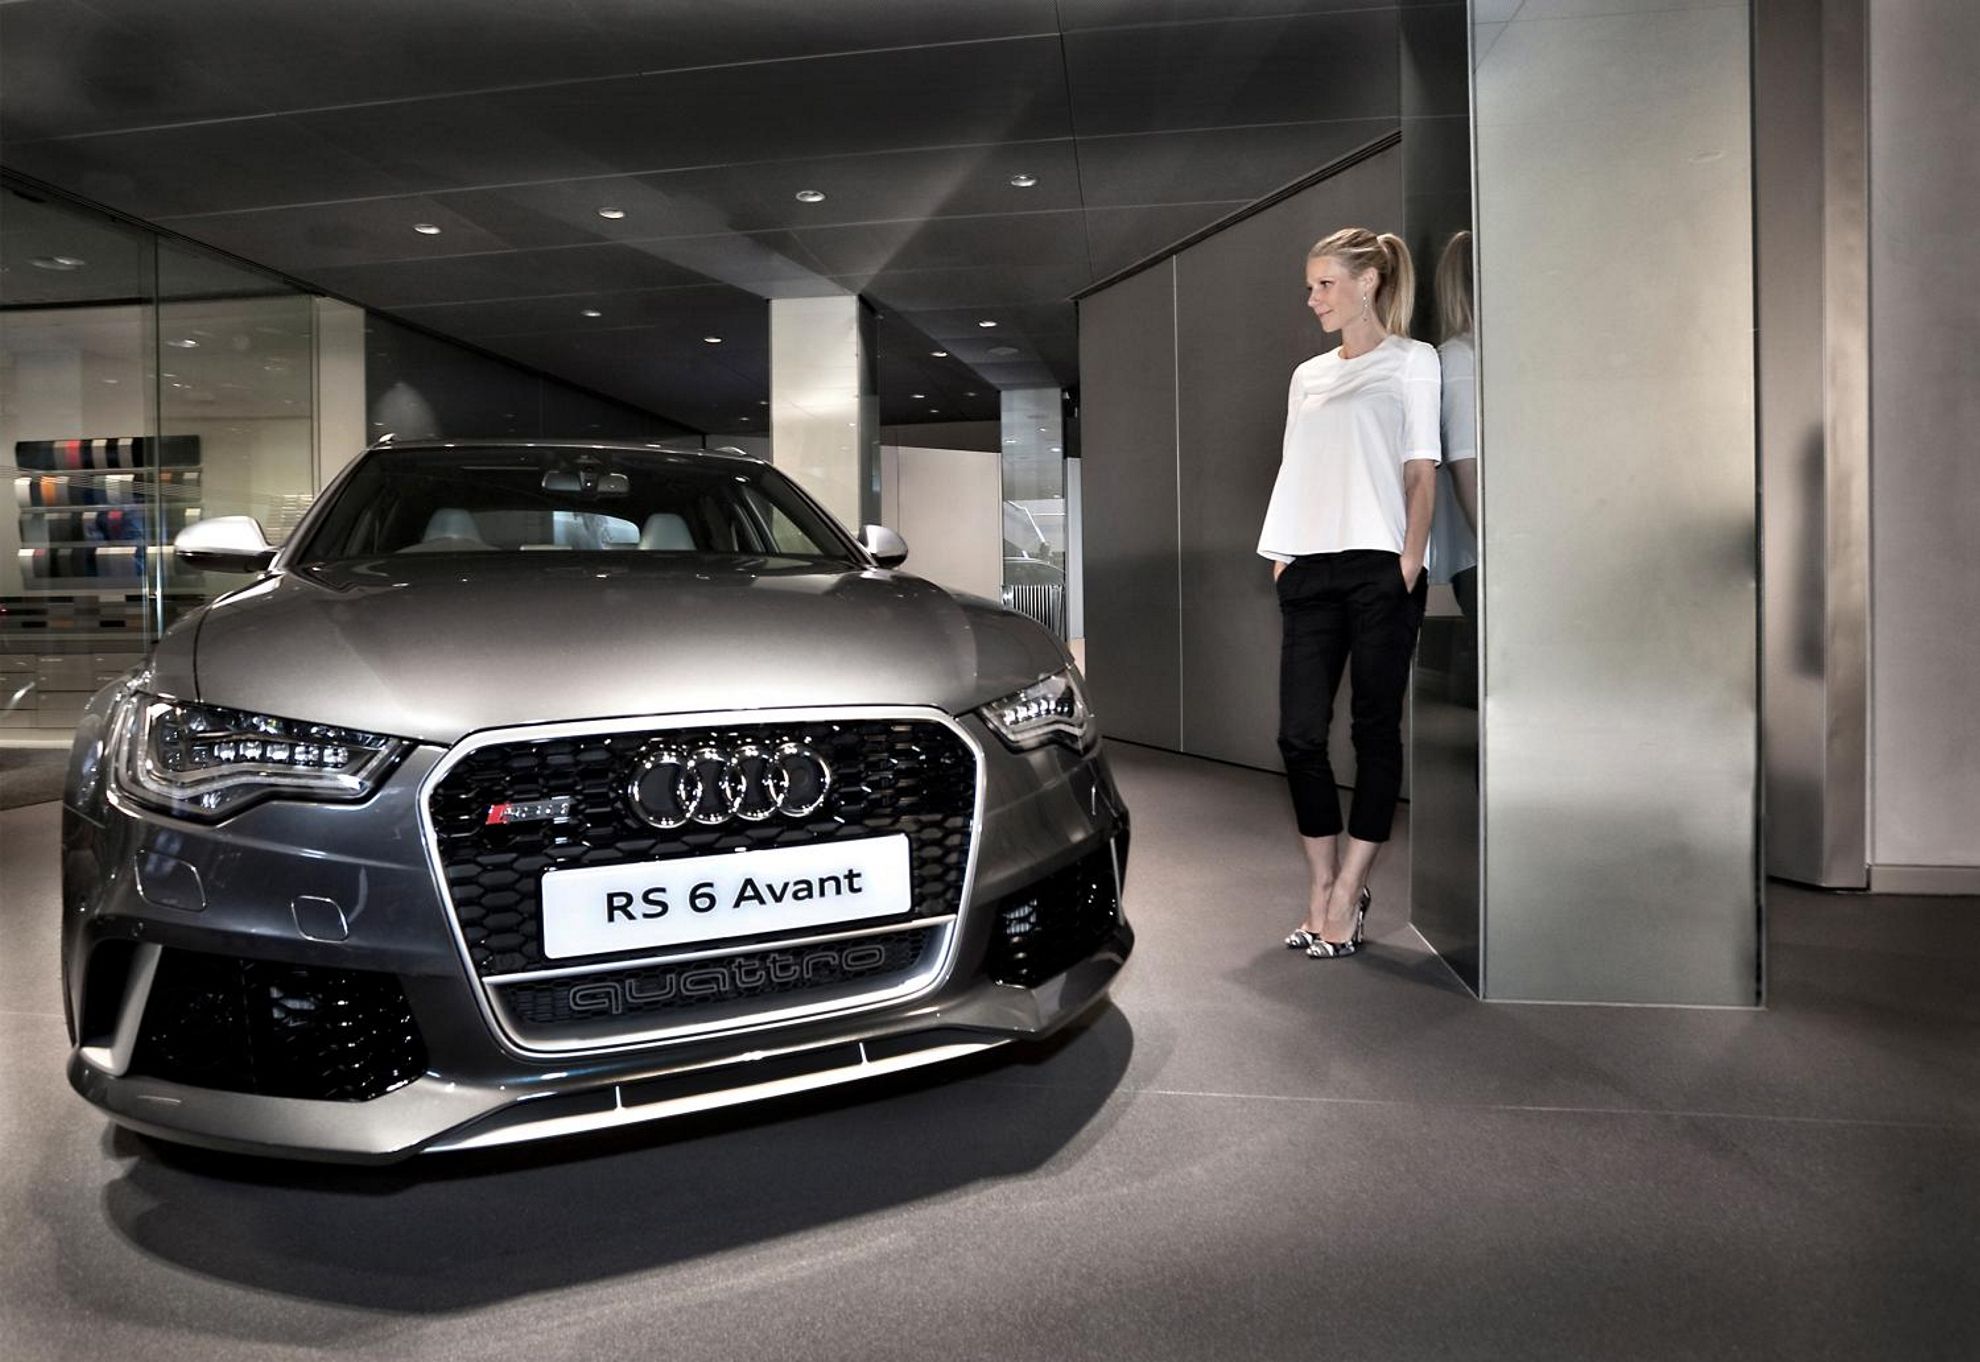 AUDI RS 6 AVANT AUCTIONED AT THE HOME OF ELTON JOHN